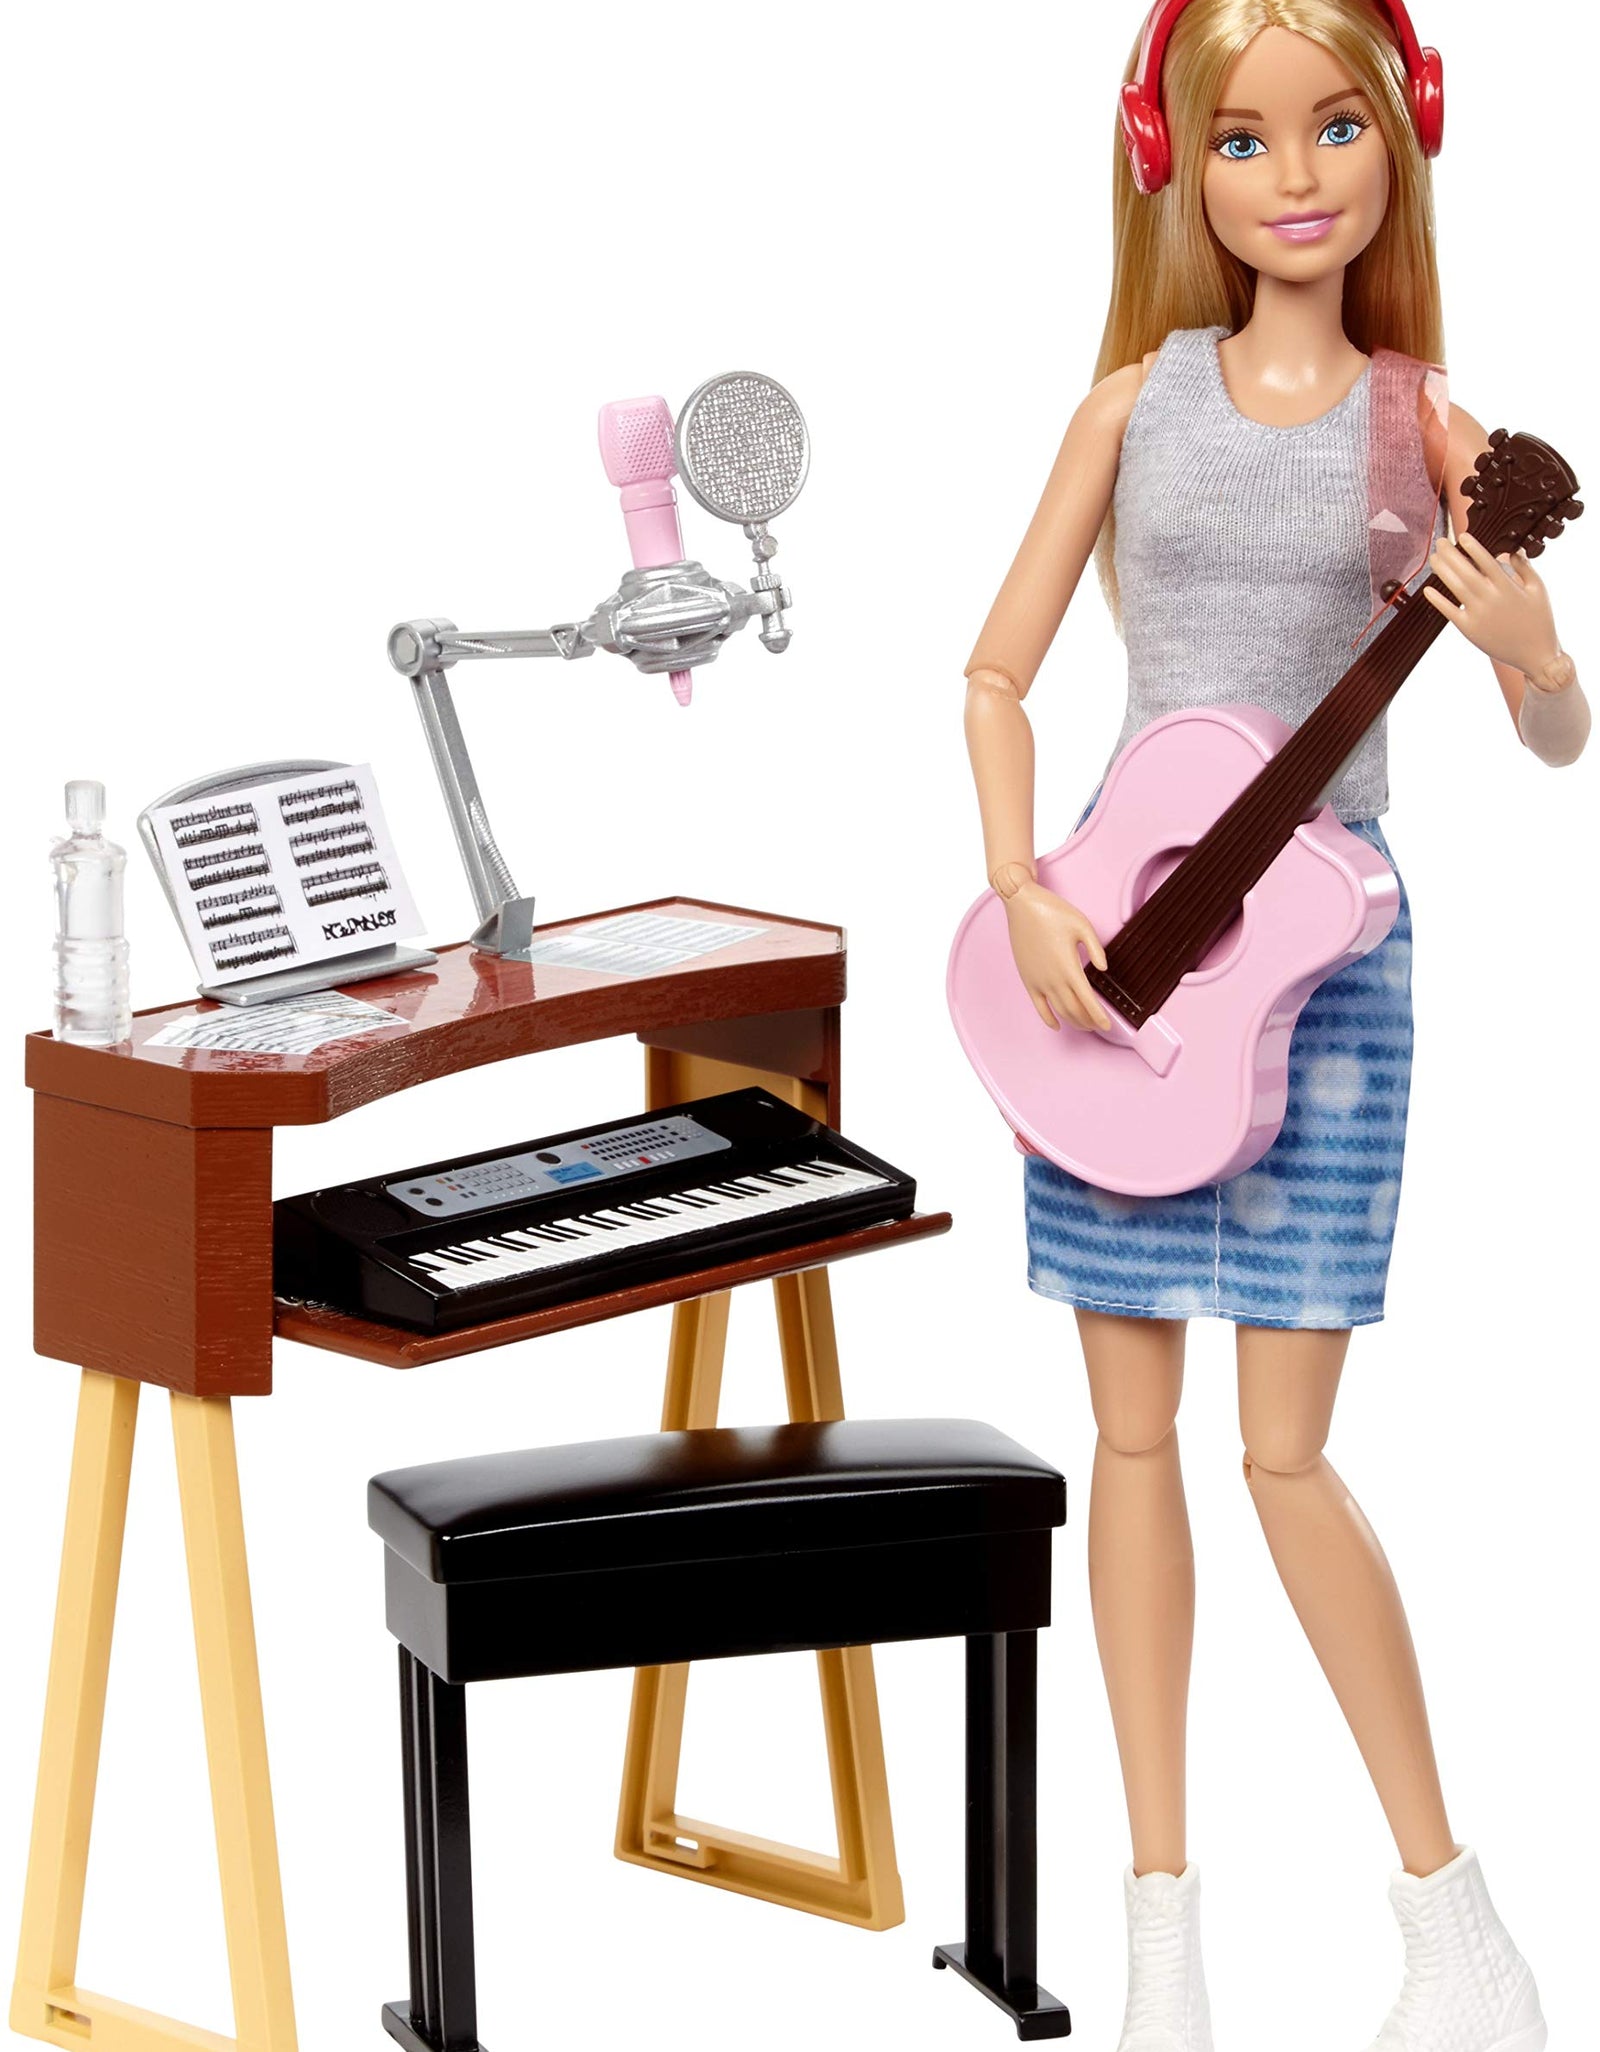 Barbie Musician Doll with Musical Instruments! [Amazon Exclusive]